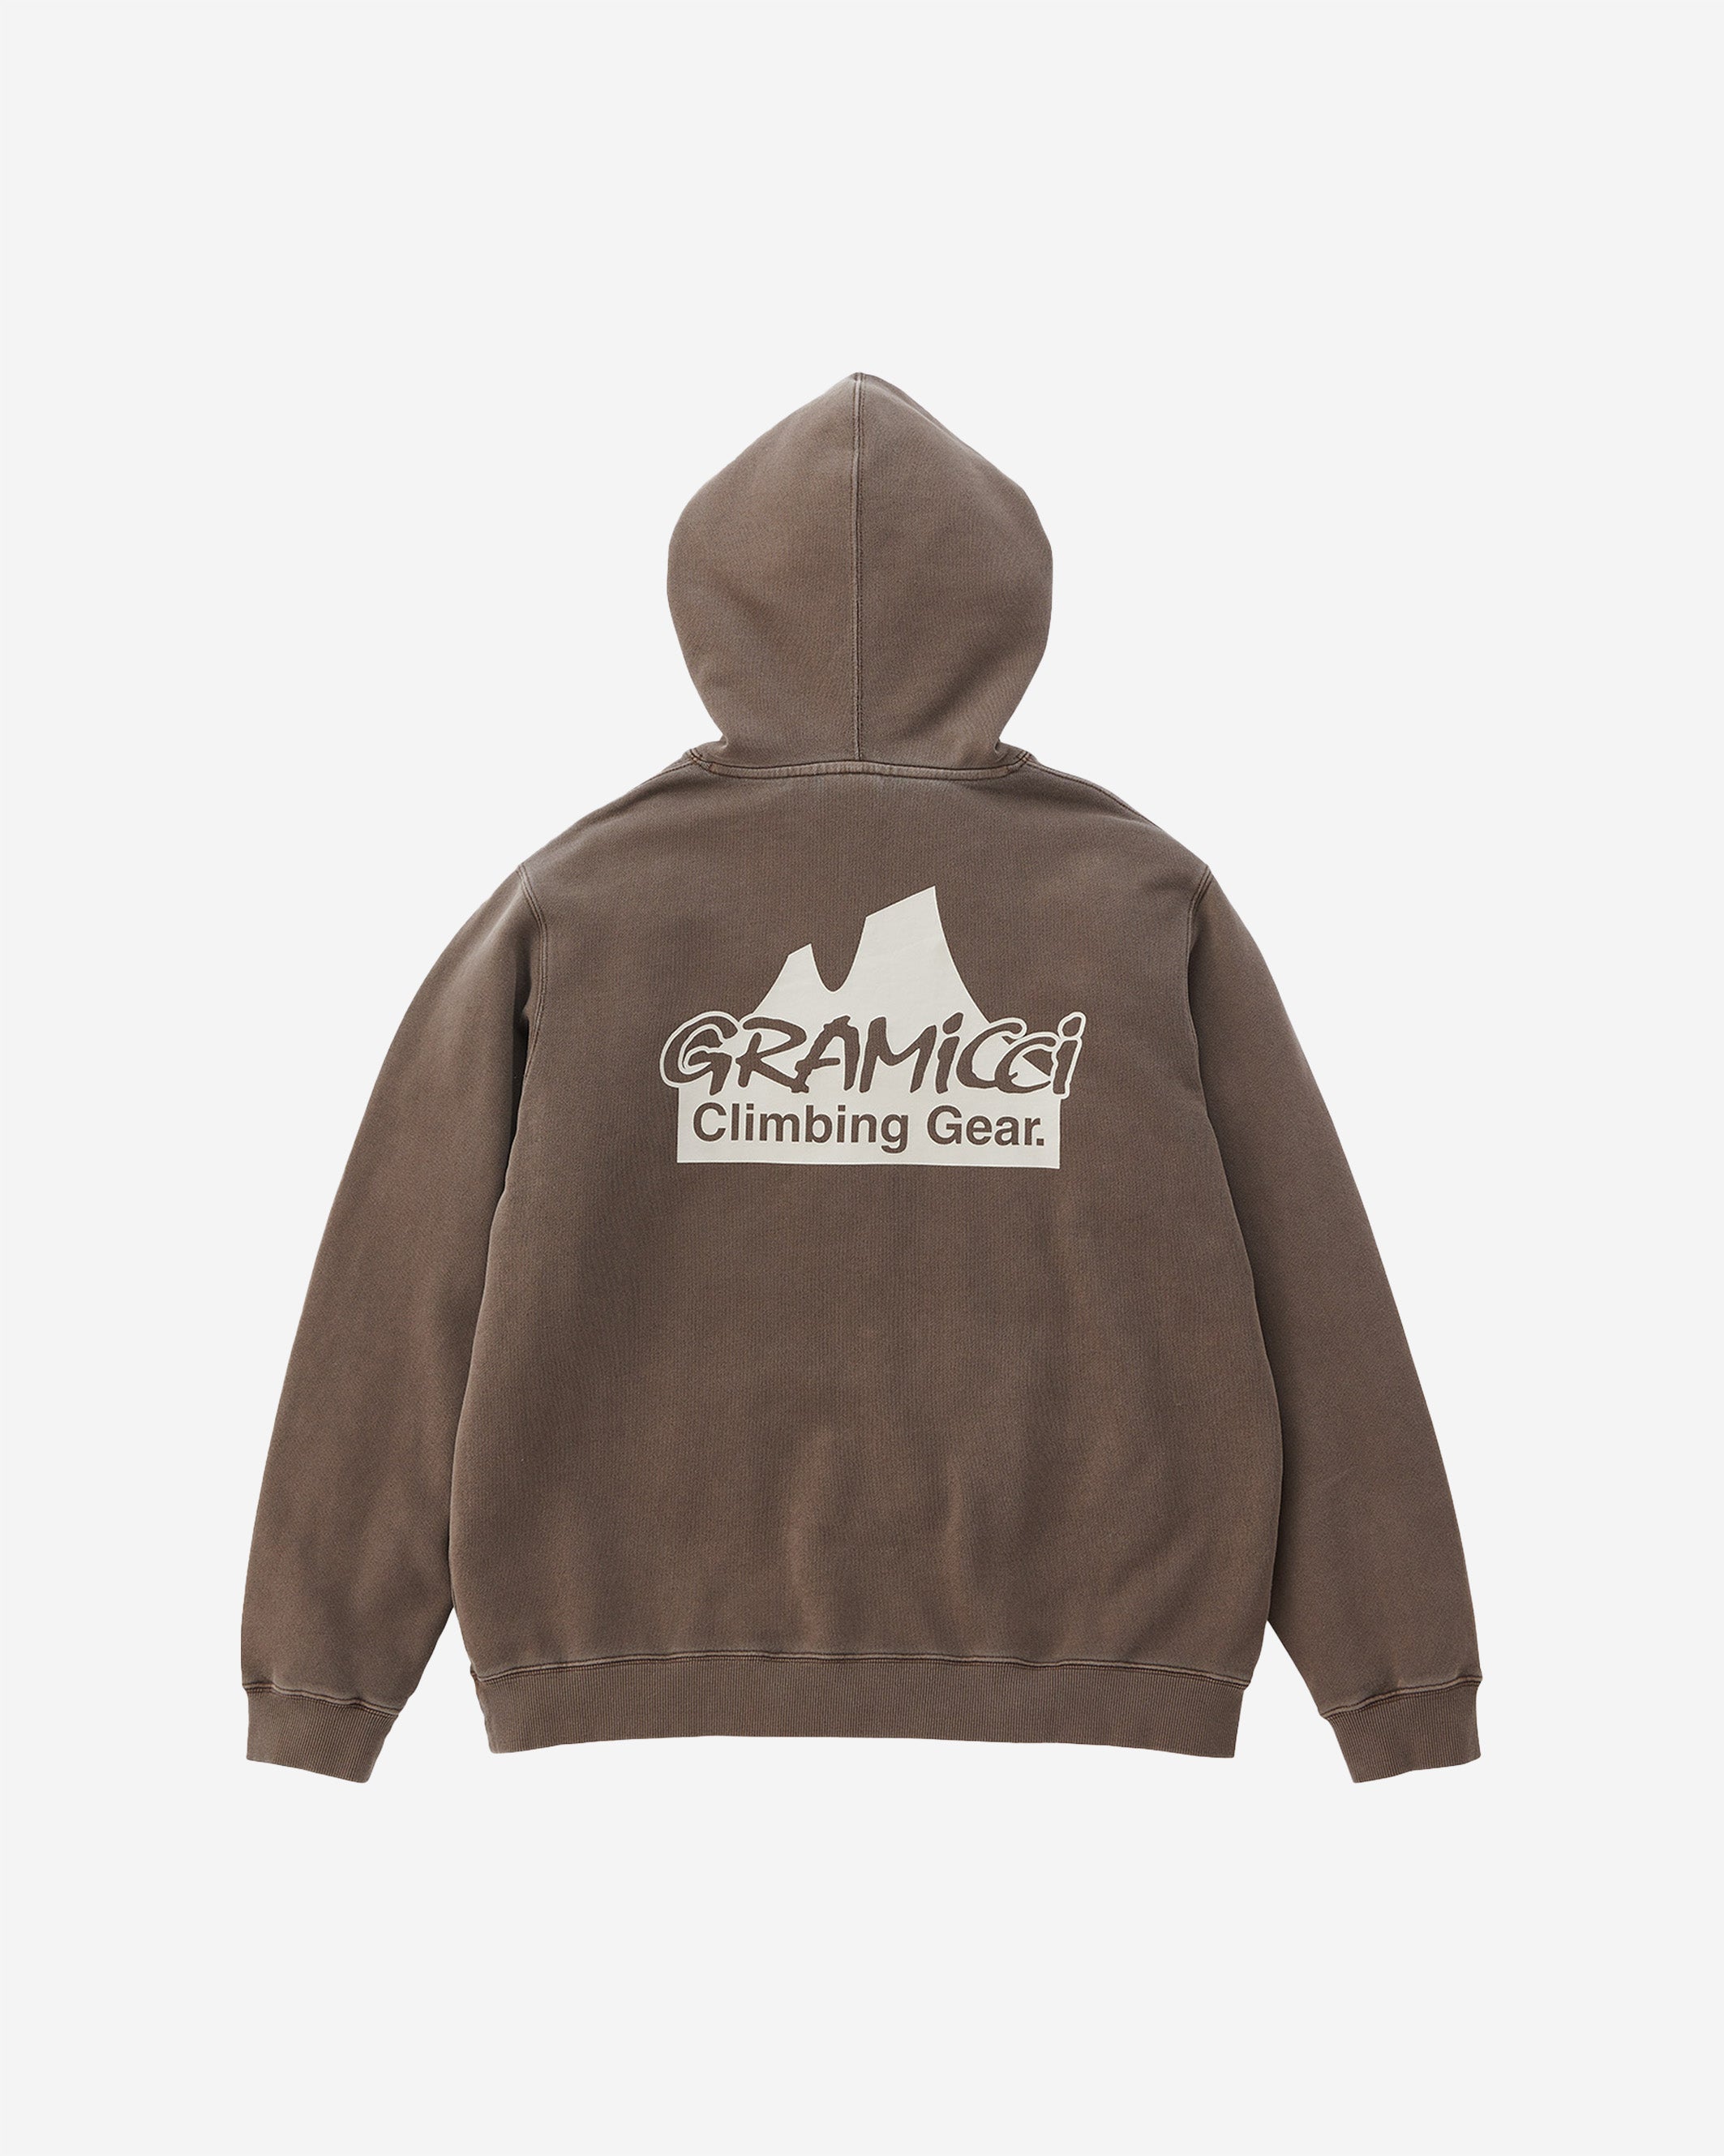 This Climbing Gear Hooded Sweatshirt is made using a durable and skin-friendly fleece lining. This wear-resistant hoodie features a print of a mountain silhouette and the "Gramicci Climbing Gear" logo on the left chest and the back of the hoodie. In addition to the standard shade of Ash Heater.